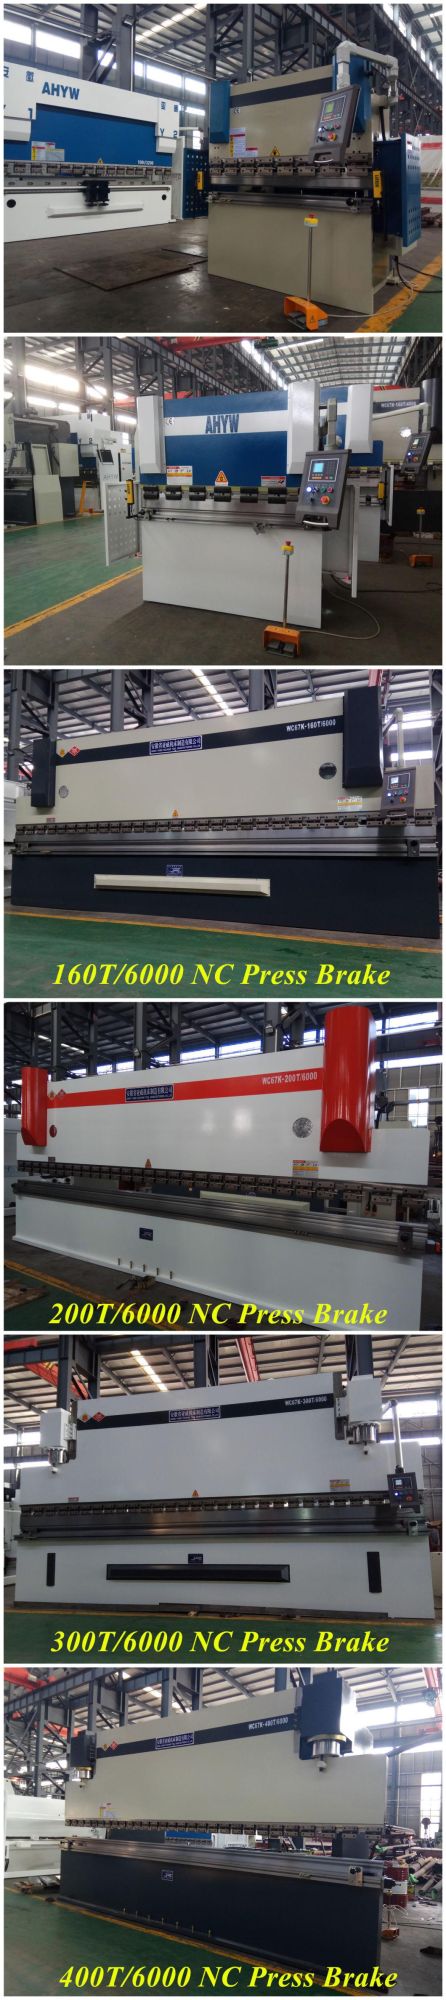 Sheet Metal Bender with Estun E21 Nc Control for Stainless Steel Sheet Fabrication